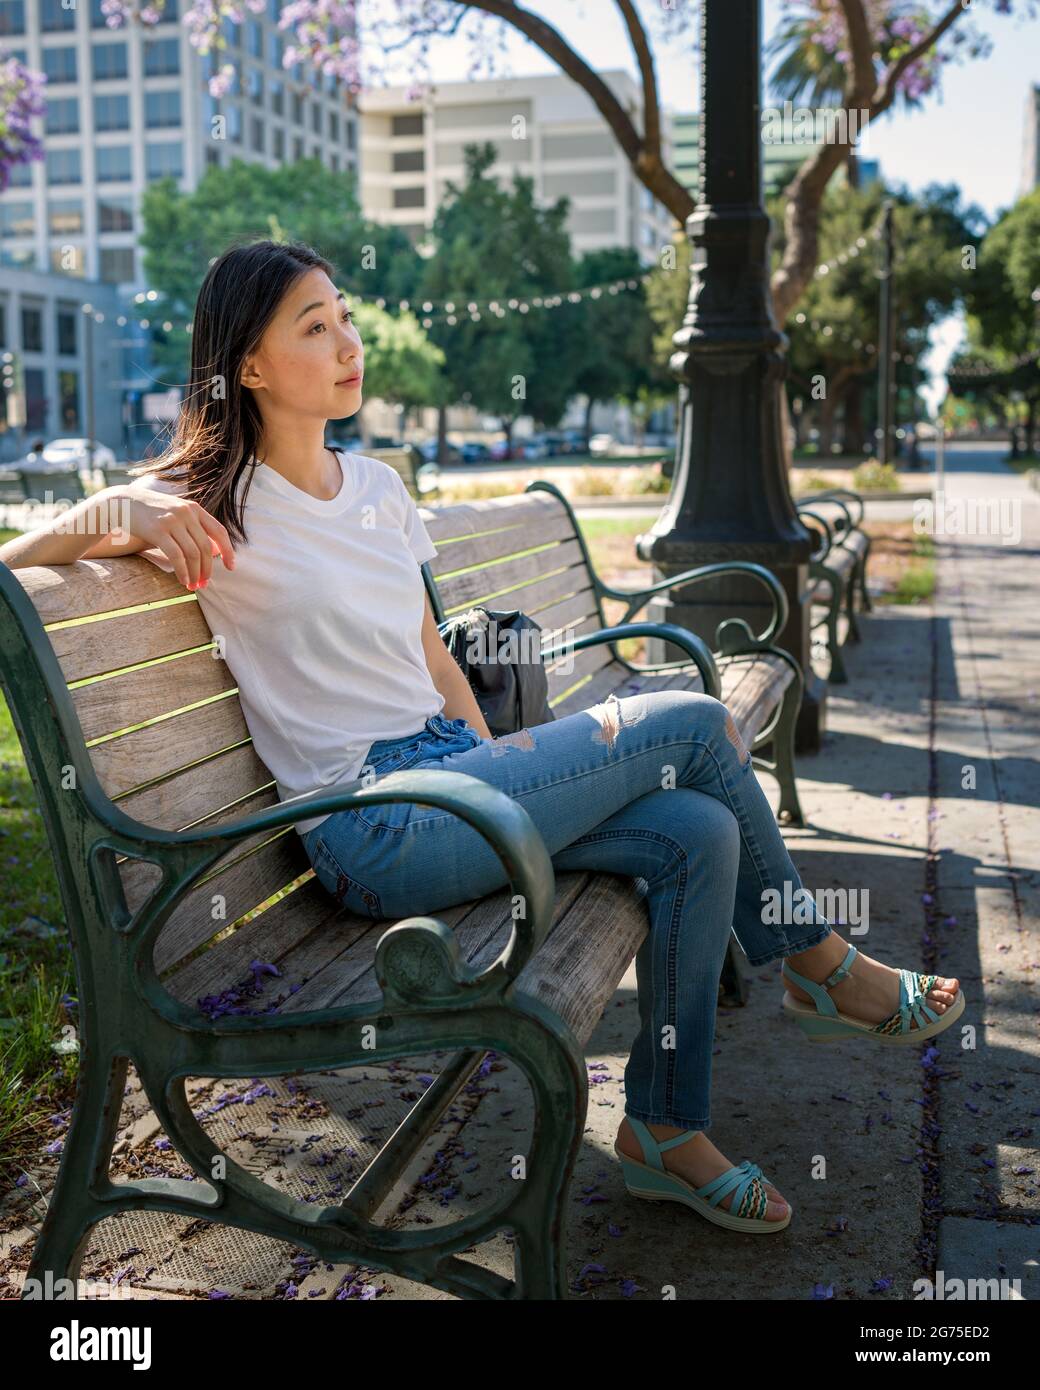 Young Asian Woman Sitting on a Park Bench Under a Jacaranda Tree Stock Photo